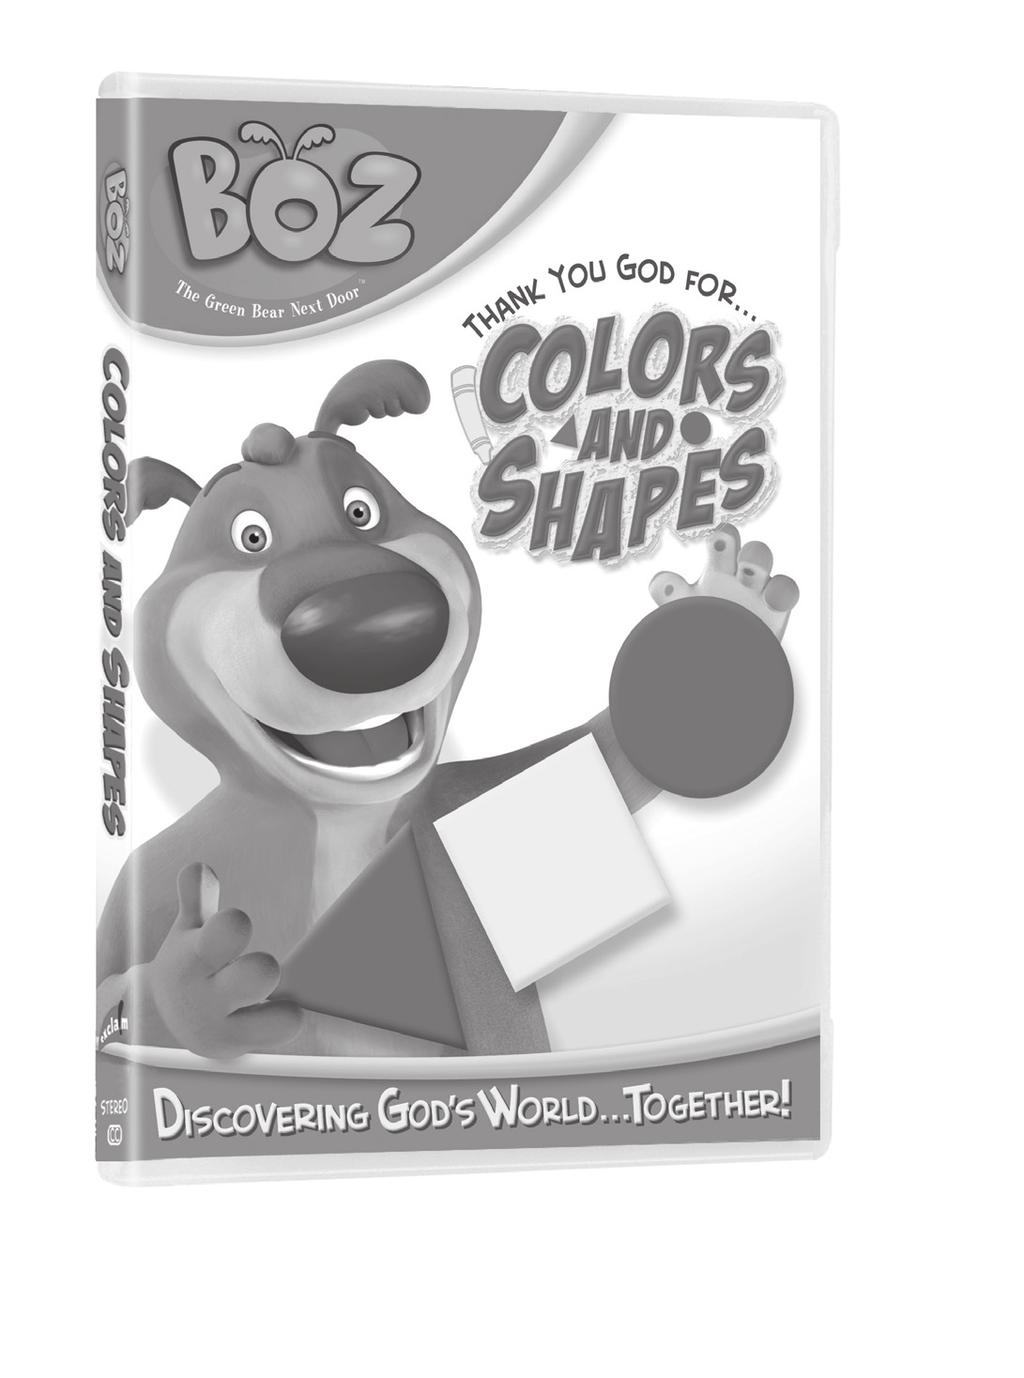 SHOW THE VIDEO You will need: Thank You God For...Colors and Shapes DVD, television and DVD player. Introduce kids to BOZ, The Green Bear Next Door!